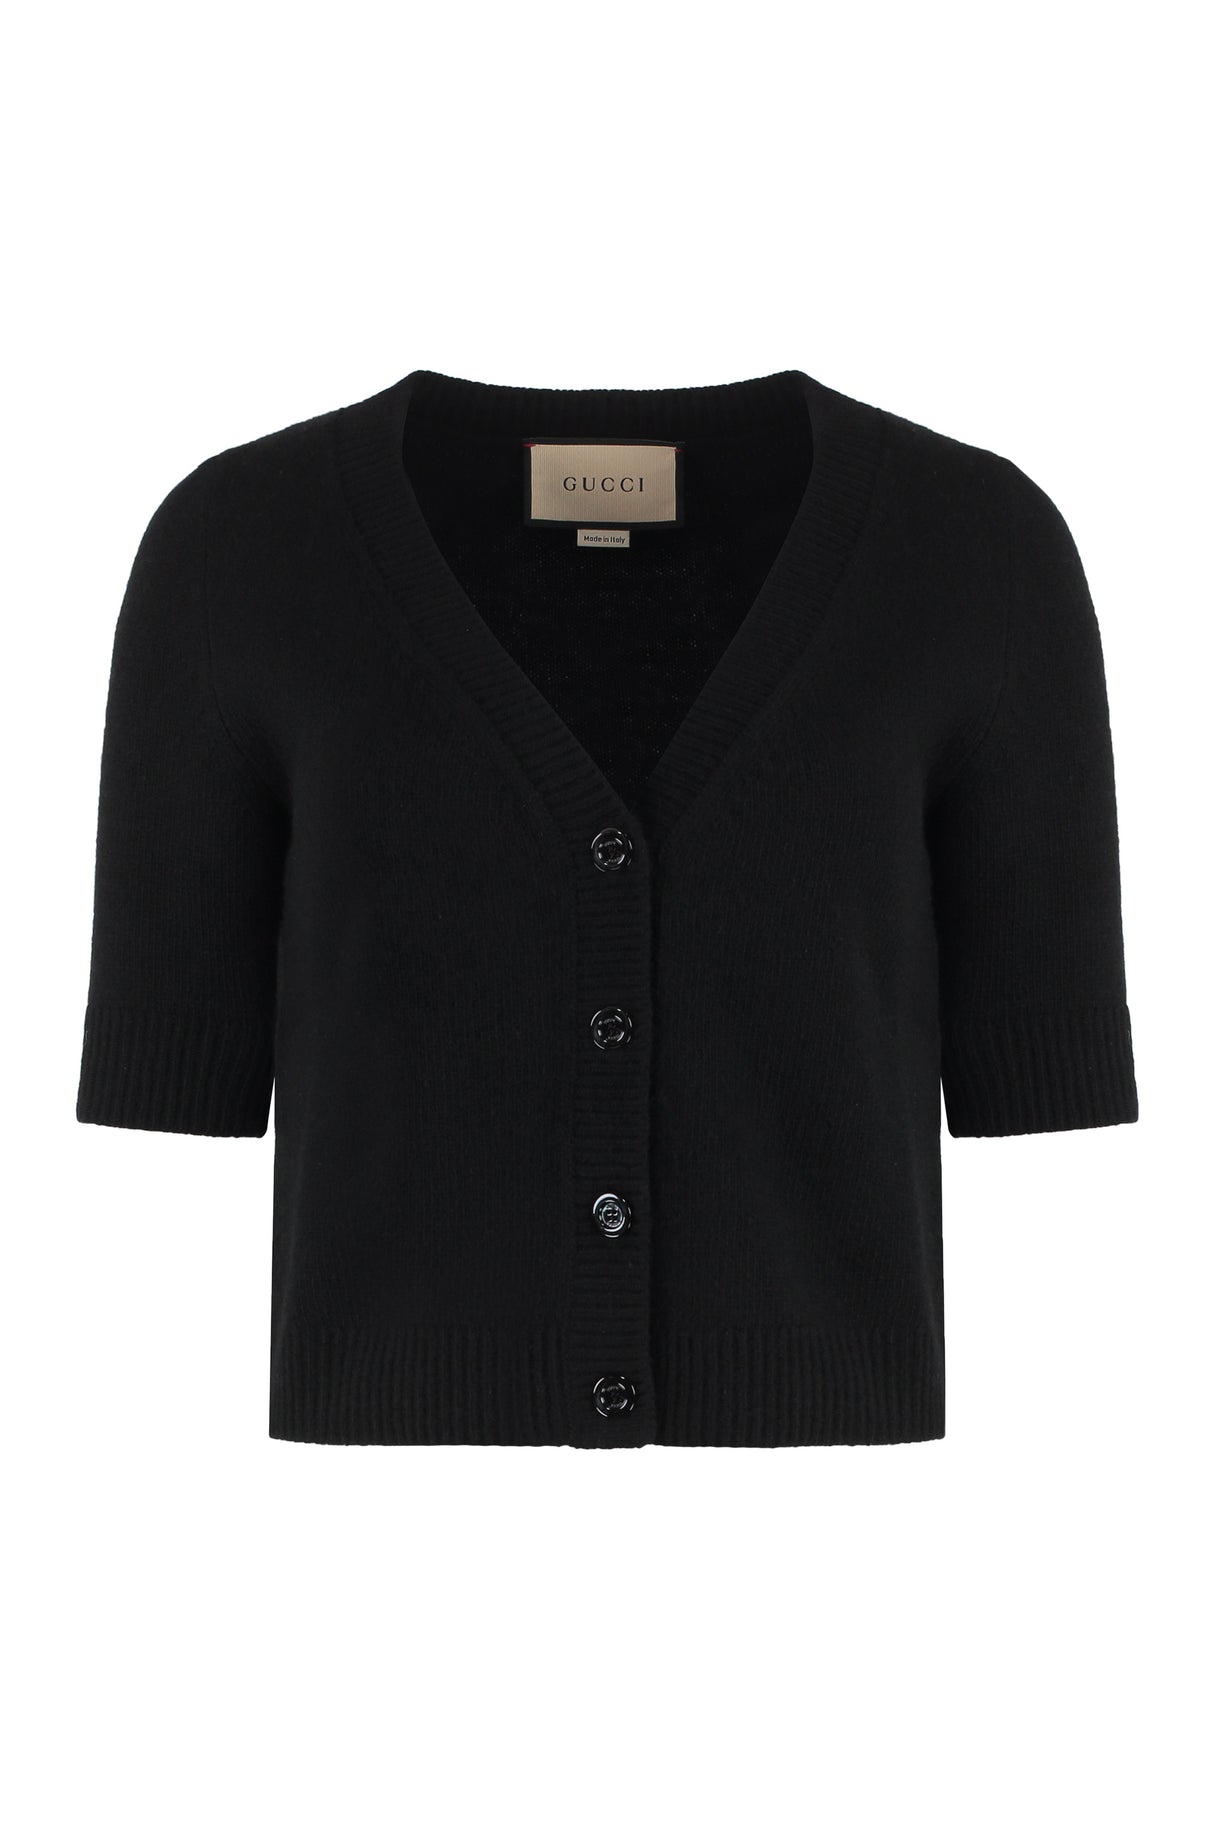 GUCCI Black Wool and Cashmere Cropped Cardigan